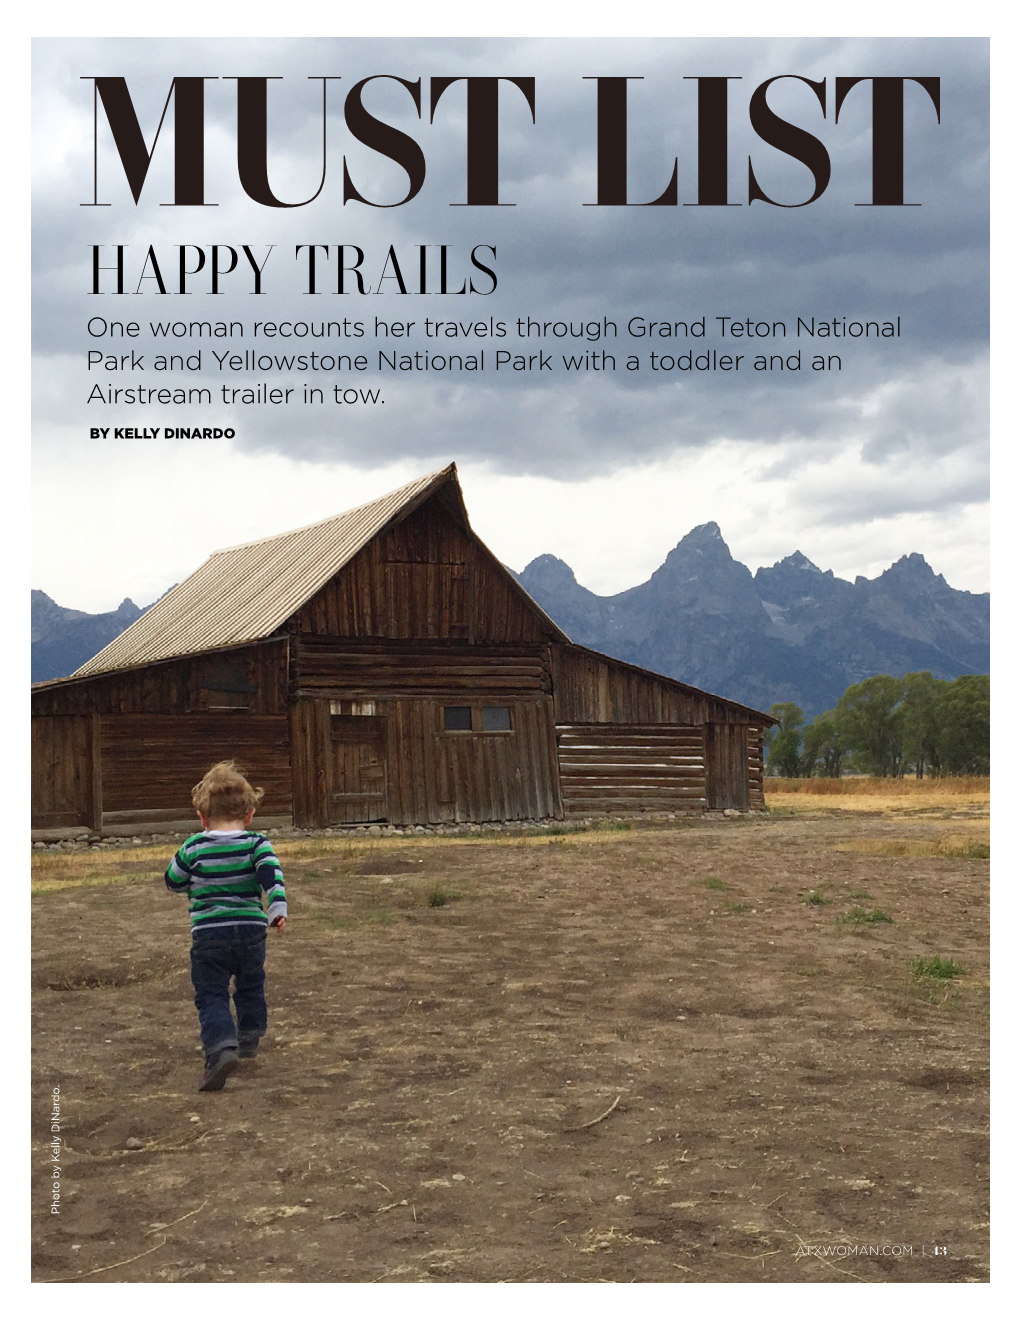 HAPPY TRAILS One Woman Recounts Her Travels Through Grand Teton National Park and Yellowstone National Park with a Toddler and an Airstream Trailer in Tow